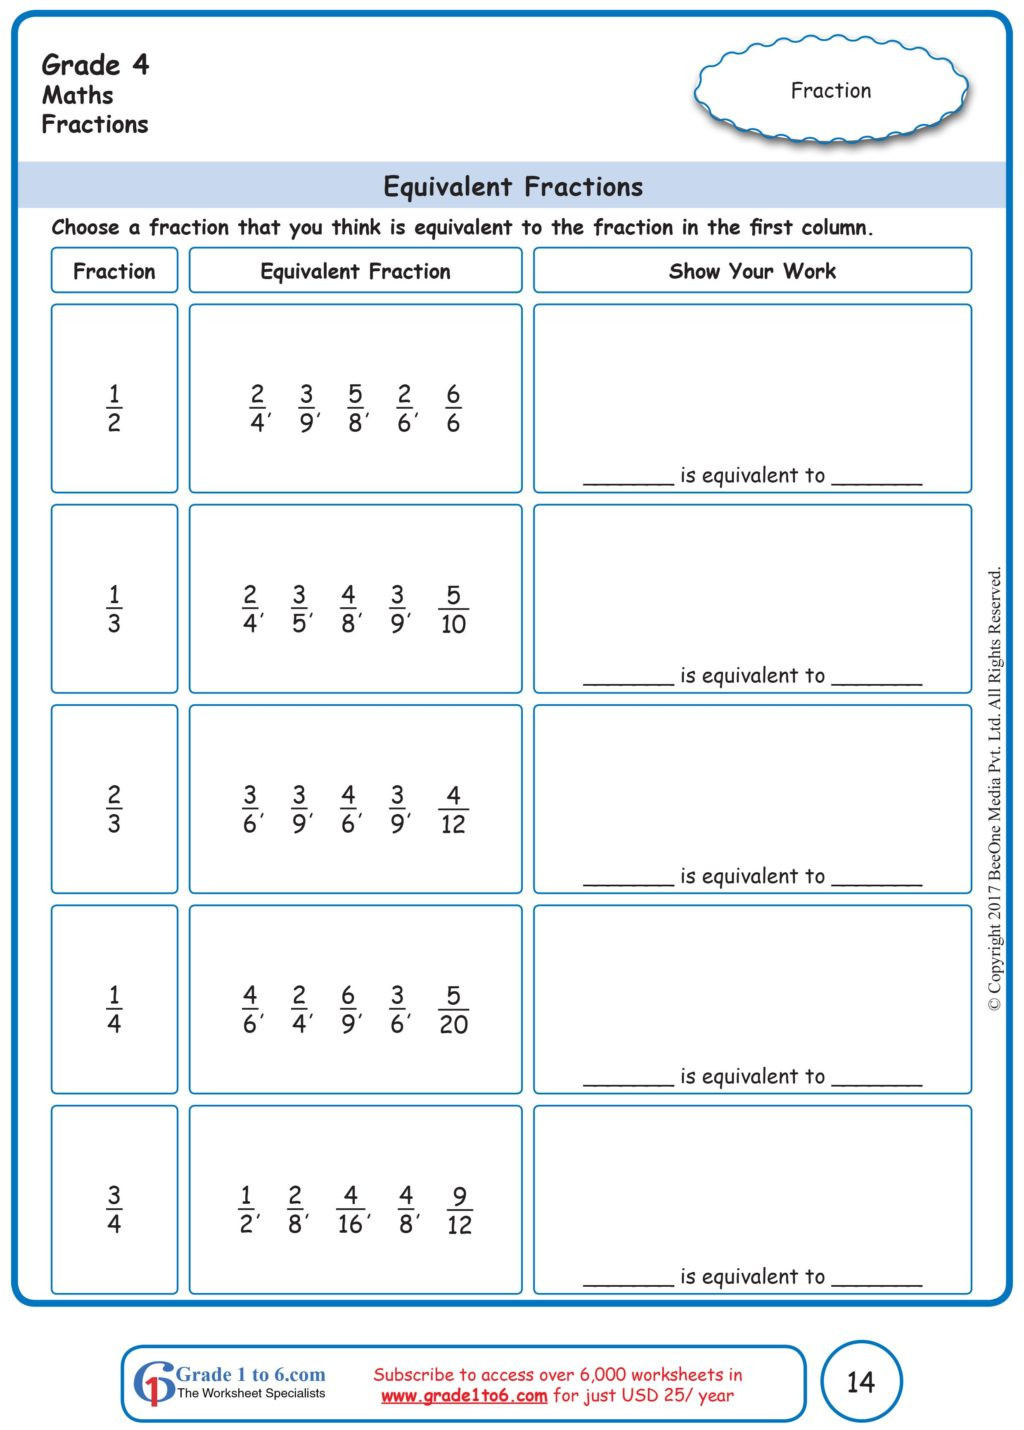 Equivalent Fractions Worksheet Pdf Worksheet these are the Best Math Worksheets for Grade